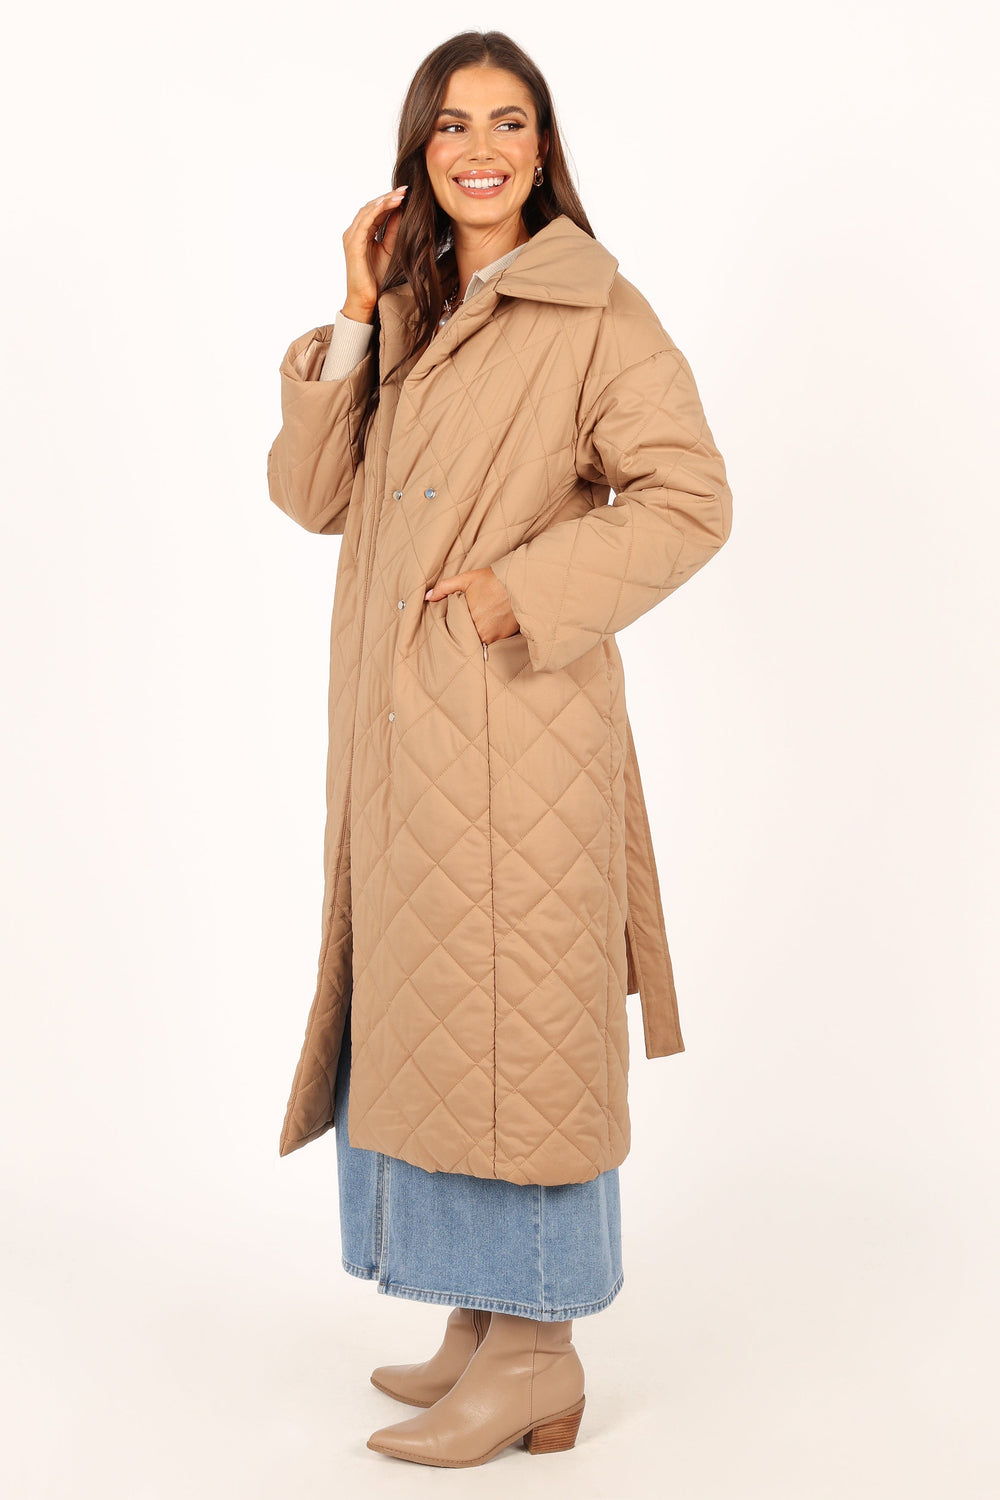 Petal and Pup USA OUTERWEAR Kallie Quilted Tie Front Coat - Camel